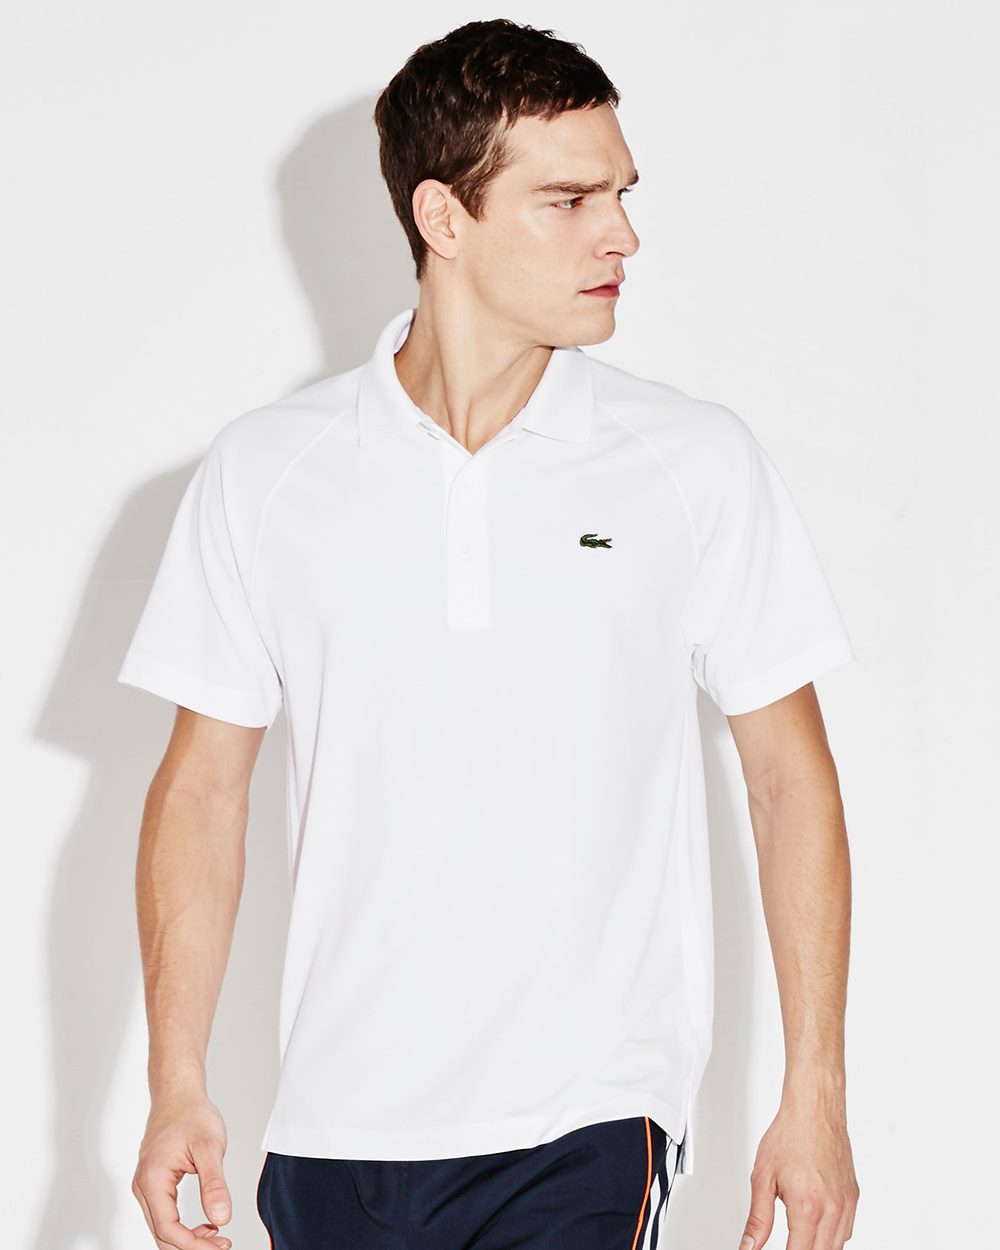 Lacoste Sport Ultra Dry Sport Shirt - DH9631-52 - Wescan Embroidery ...